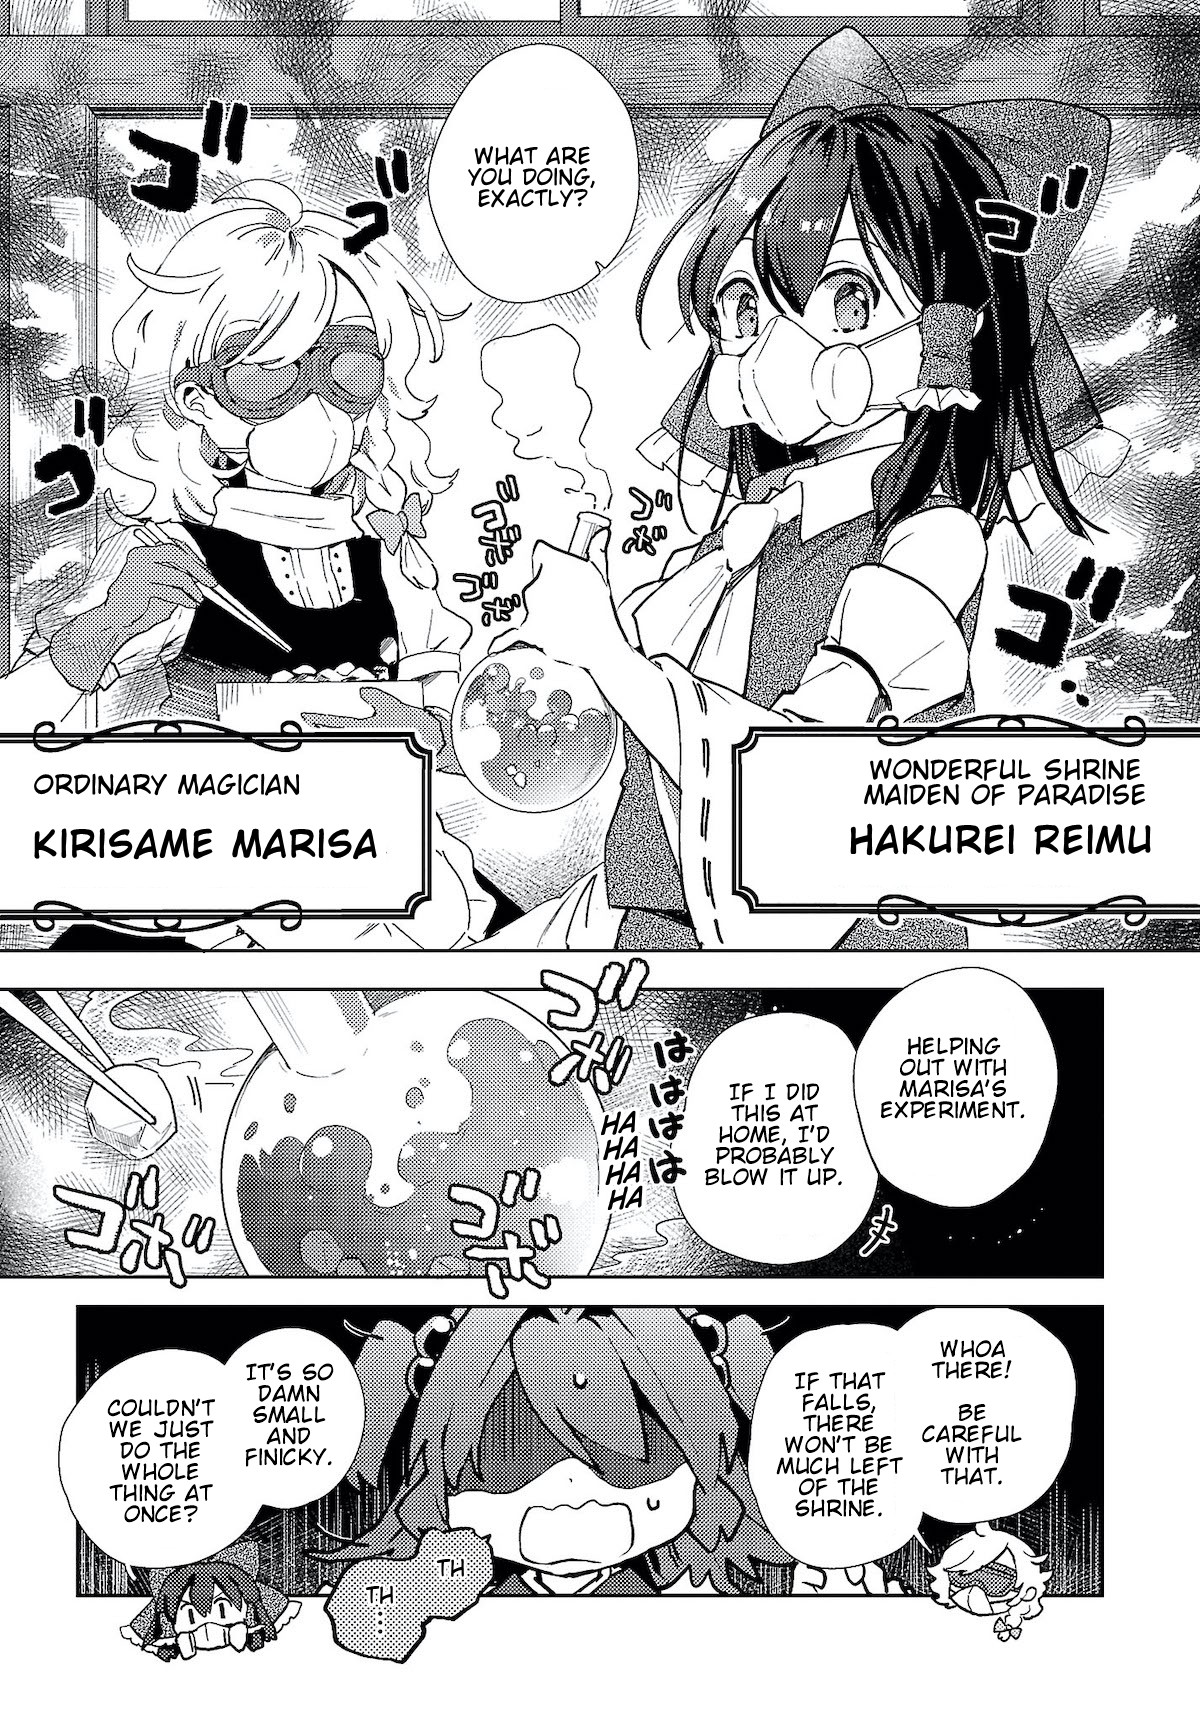 The Shinigami's Rowing Her Boat As Usual - Touhou - Page 3